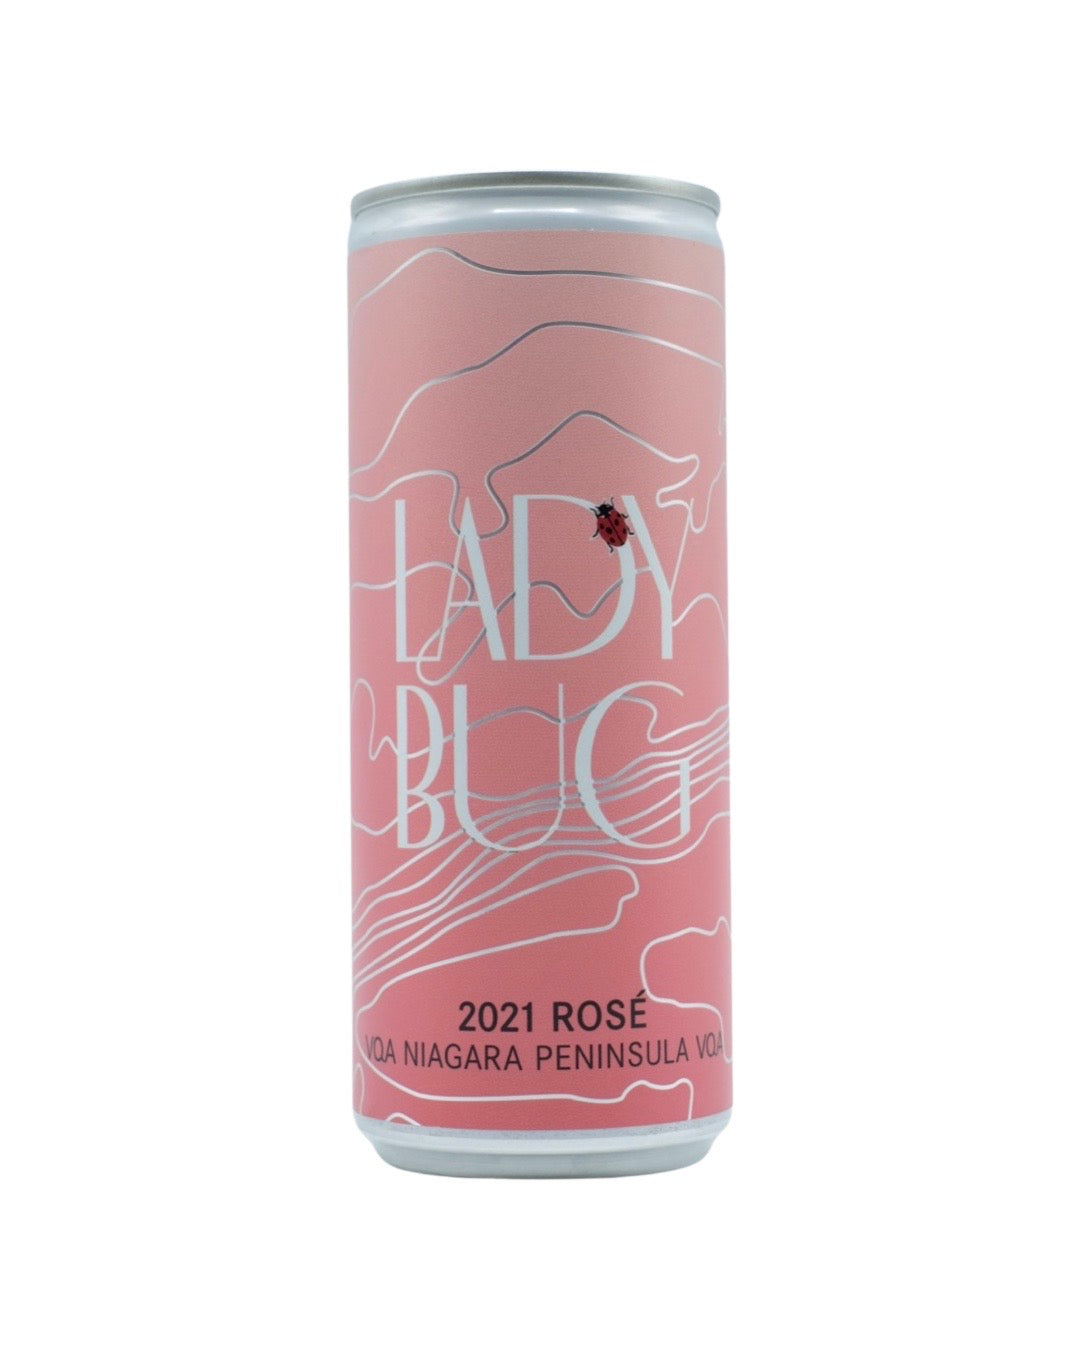 Malivoire Lady Bug Rose Cans